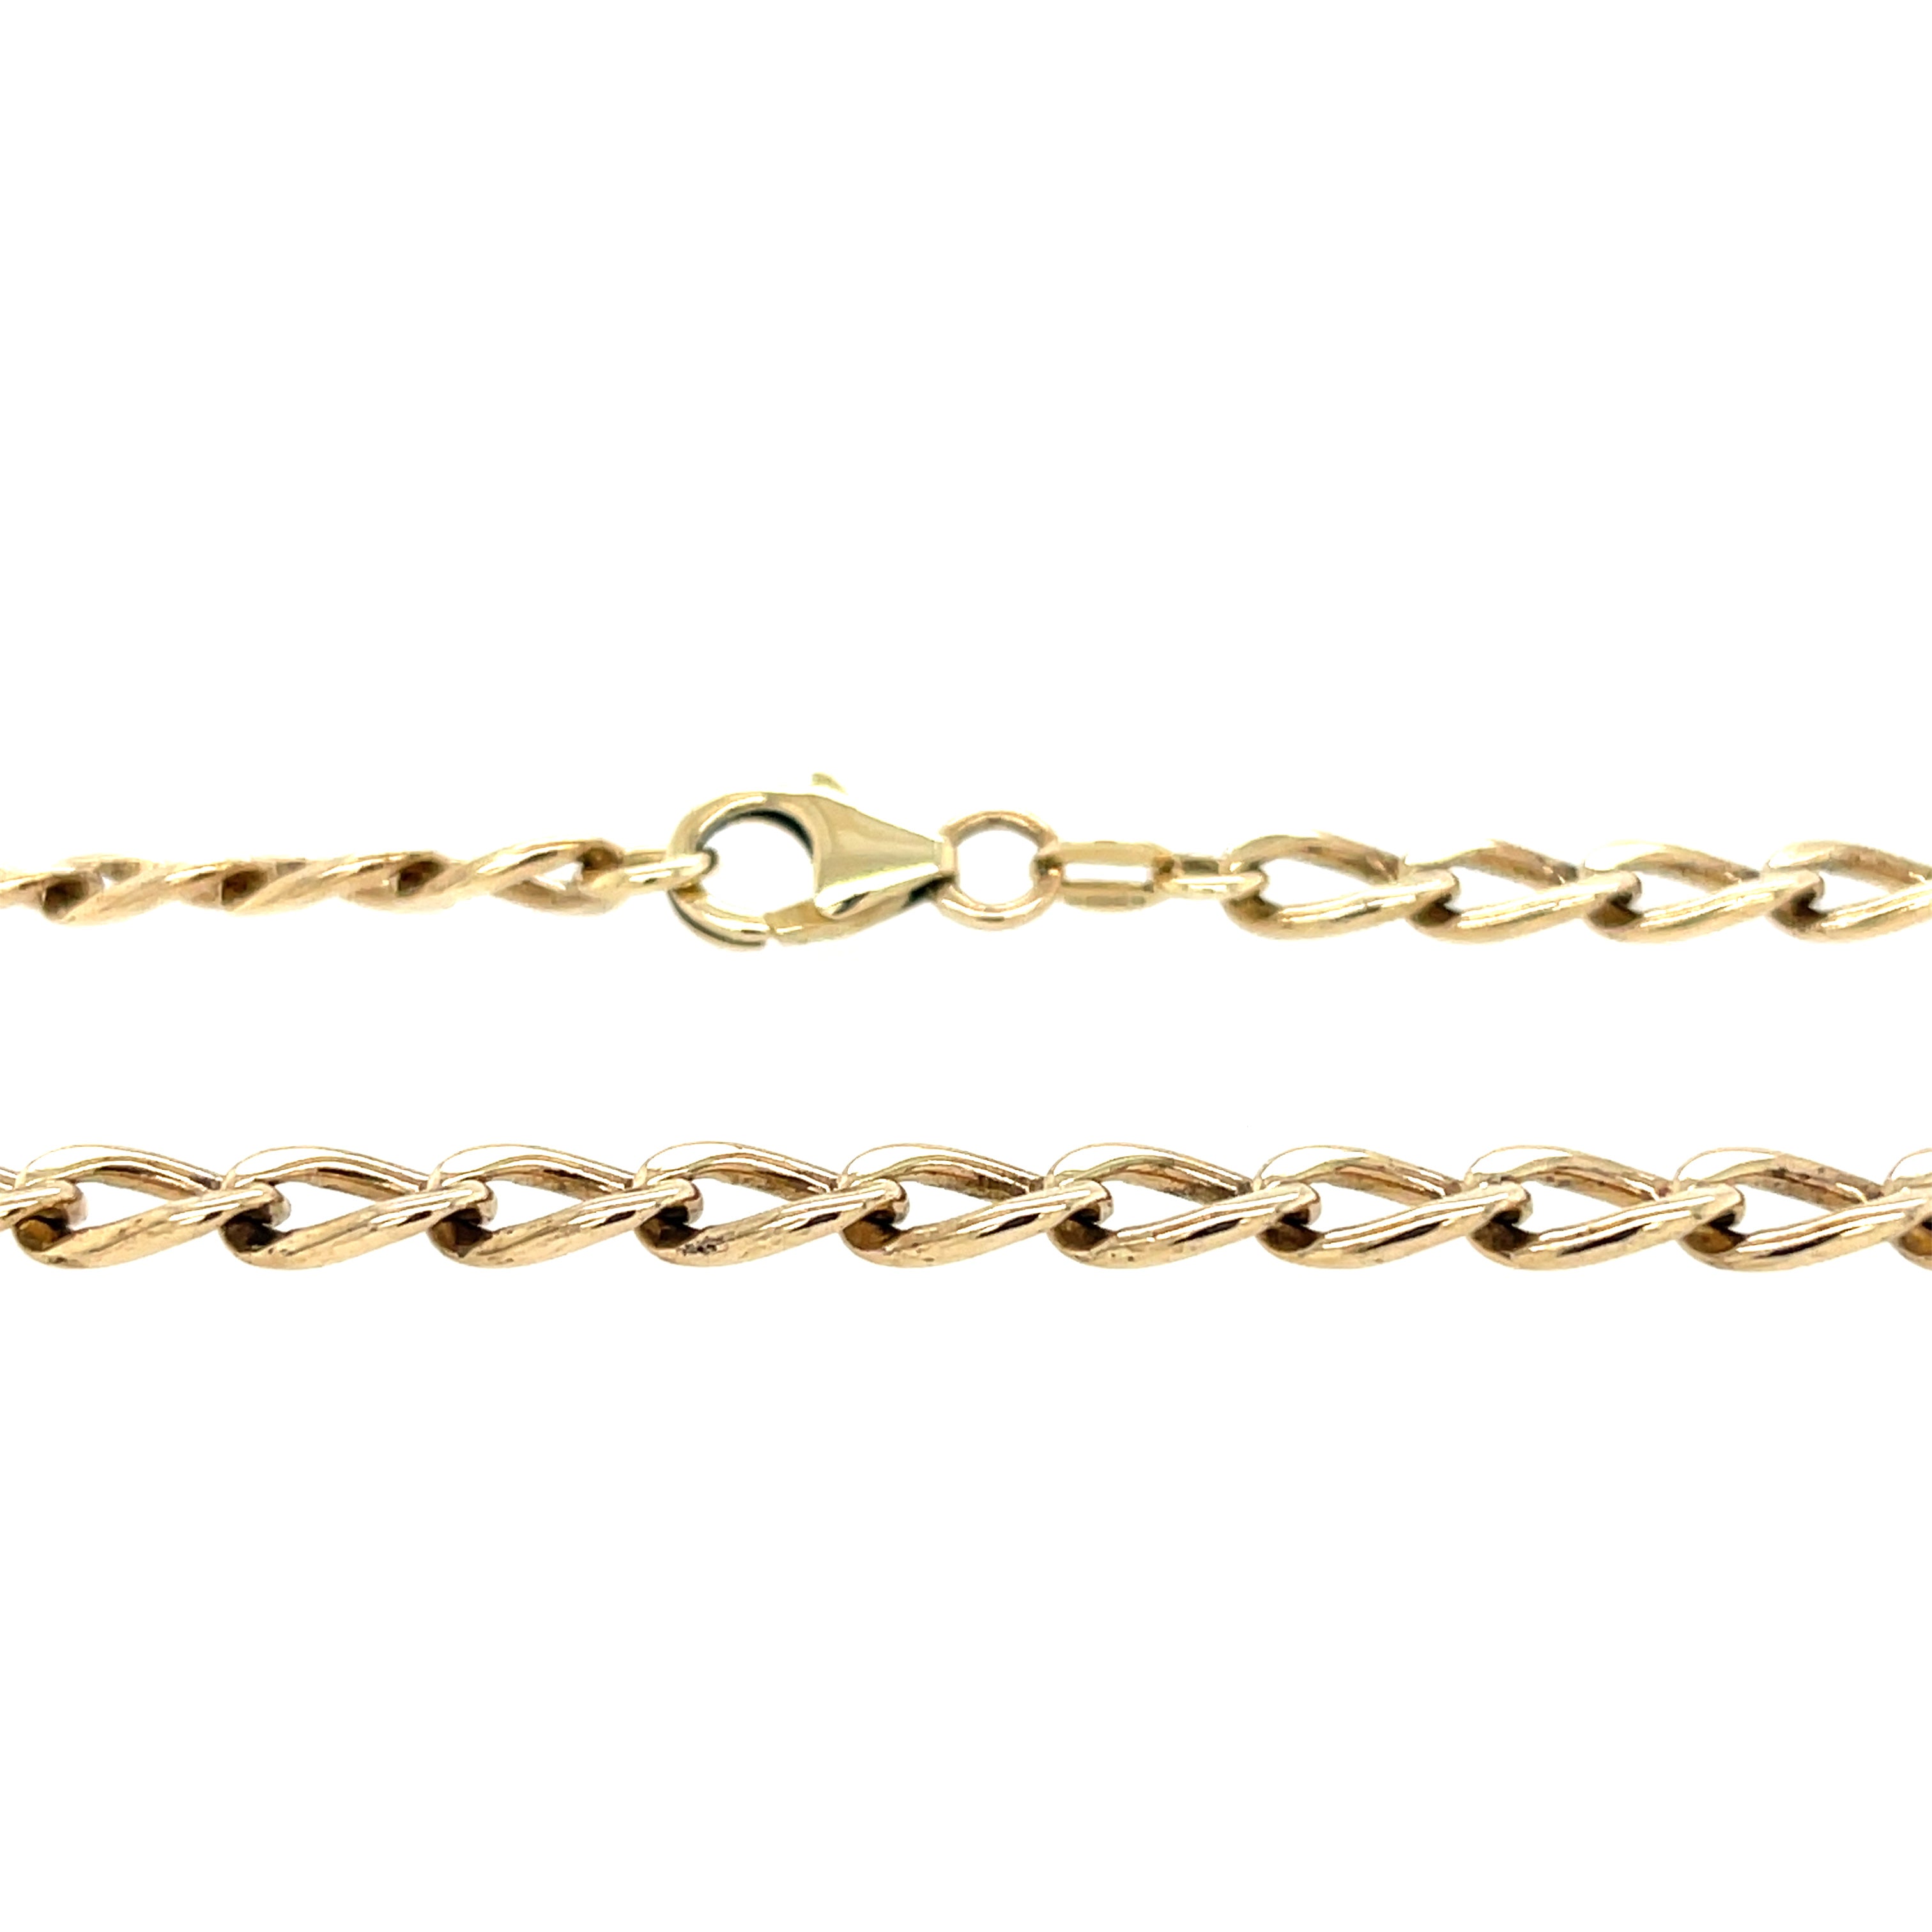 9ct Yellow Gold 24 Inch Elongated Curb Link Chain - 23.40g